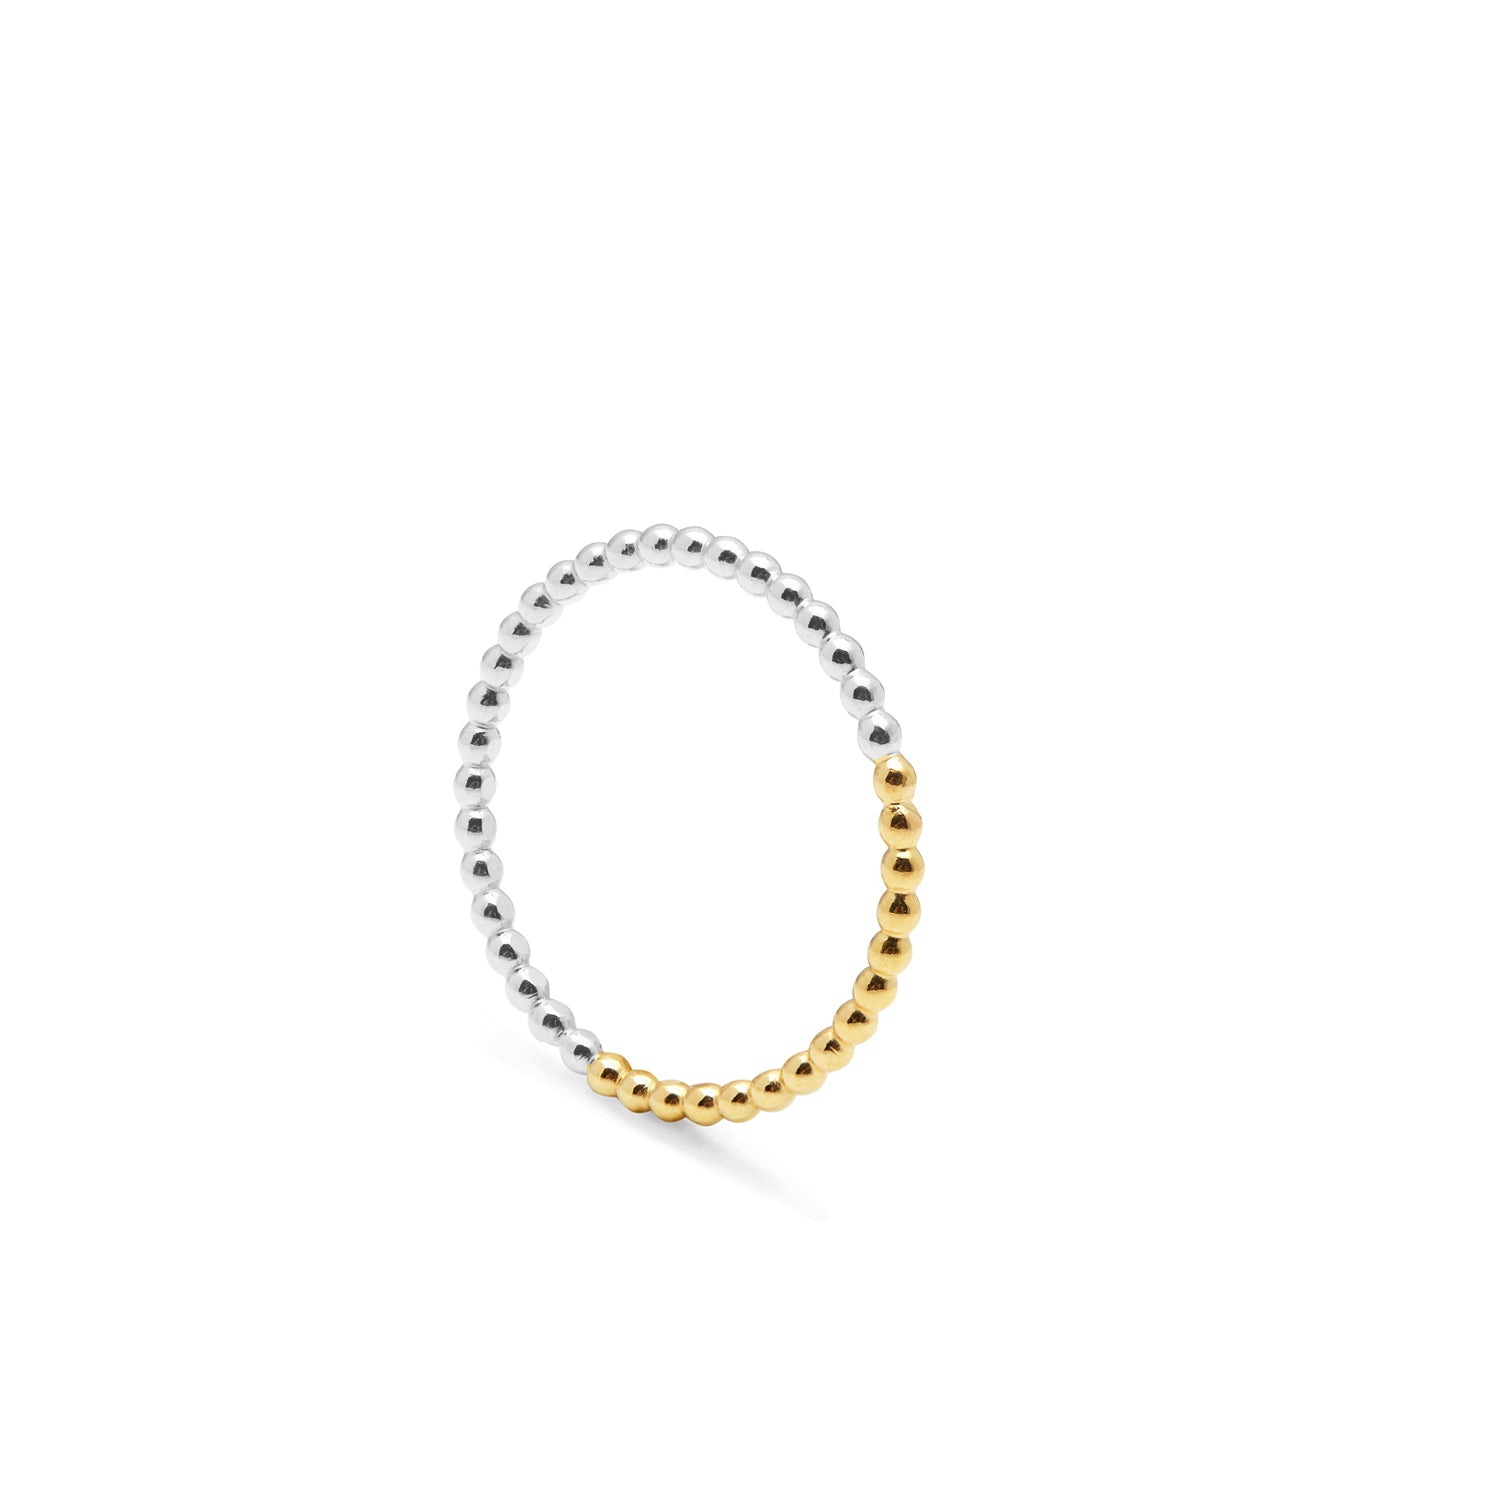 Golden Ratio Sphere Ring - 9k Yellow Gold & Silver